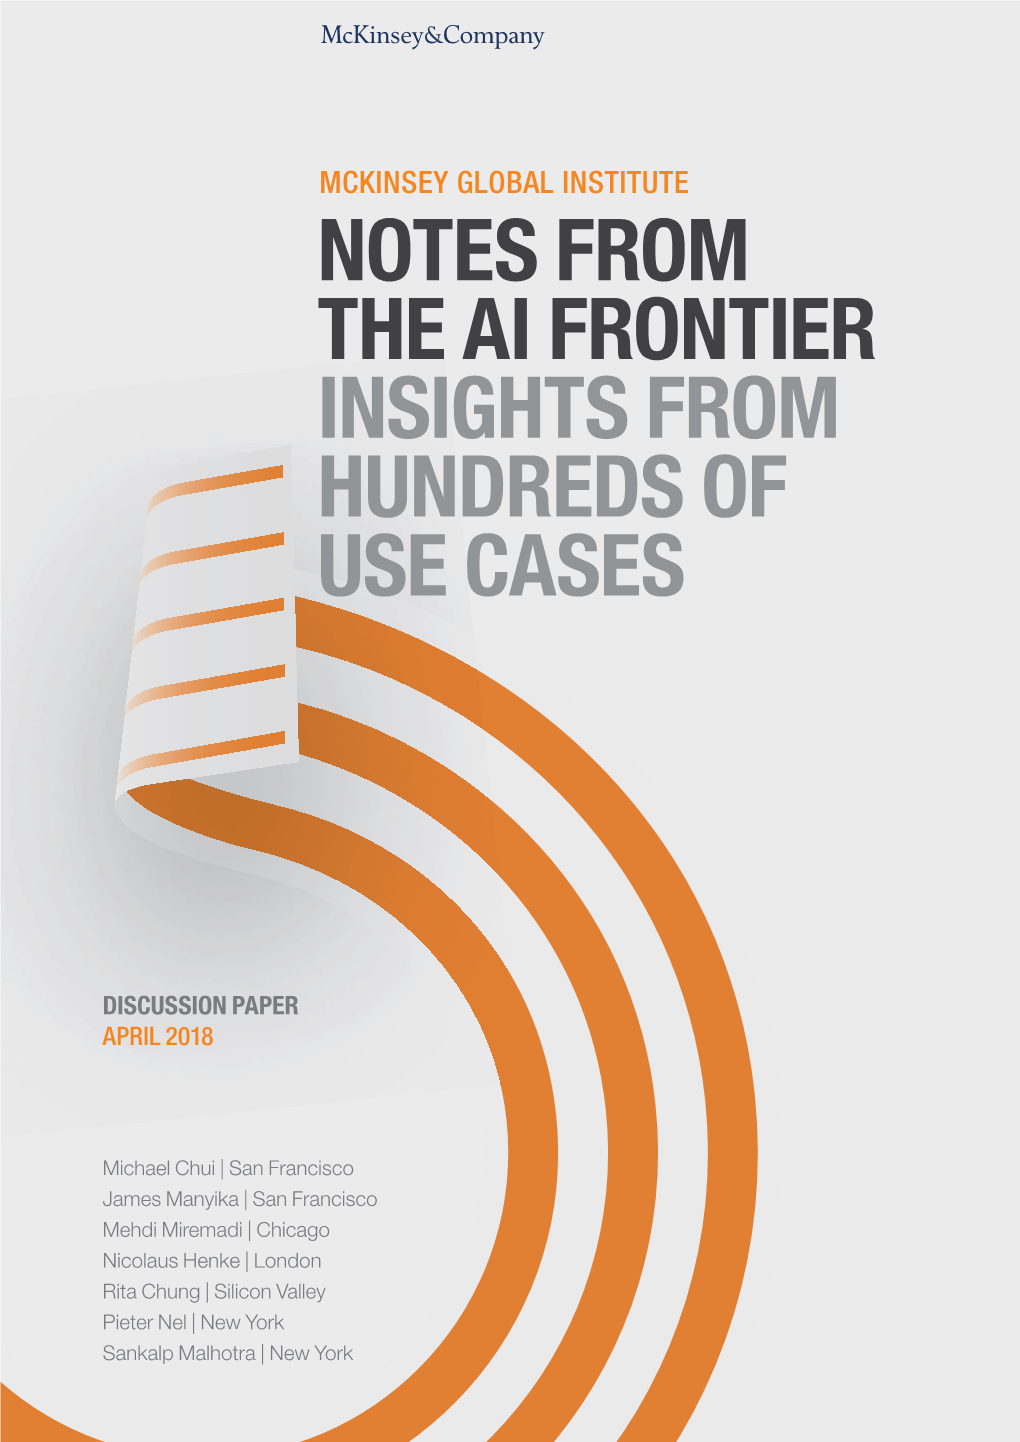 Notes from the Ai Frontier Insights from Hundreds of Use Cases